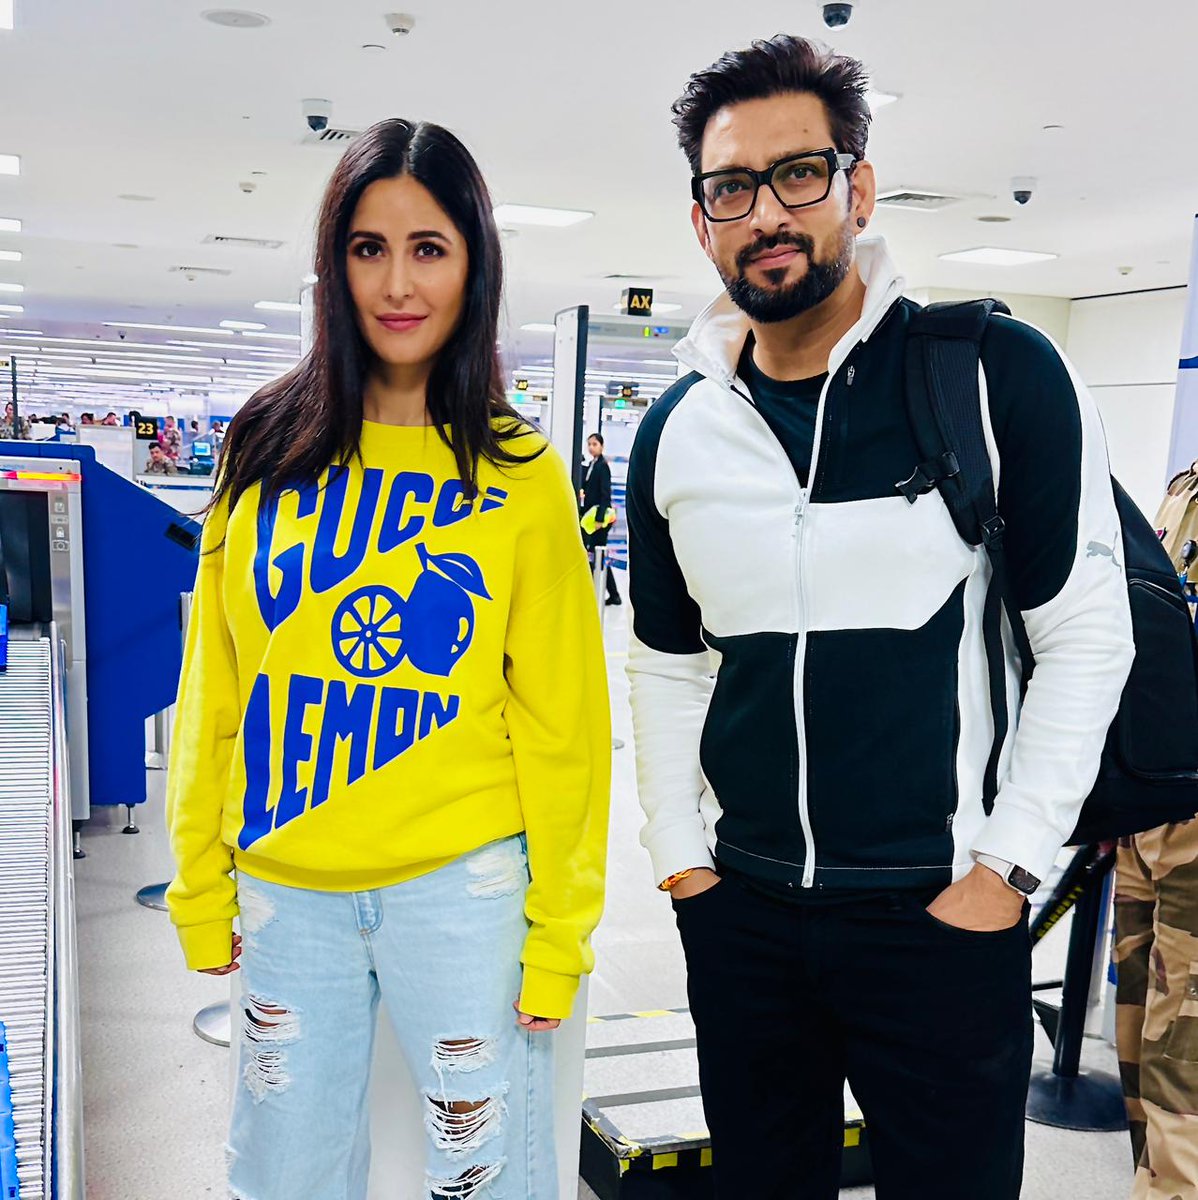 Actor Aadesh Chaudhary recently met gorgeous Katrina Kaif at the airport. Aadesh was floored by Katrina’s humble nature. 
.
.
.
.
#aadeshchaudhary #katrinakaif
#airportspotting #celebs #talkingbling